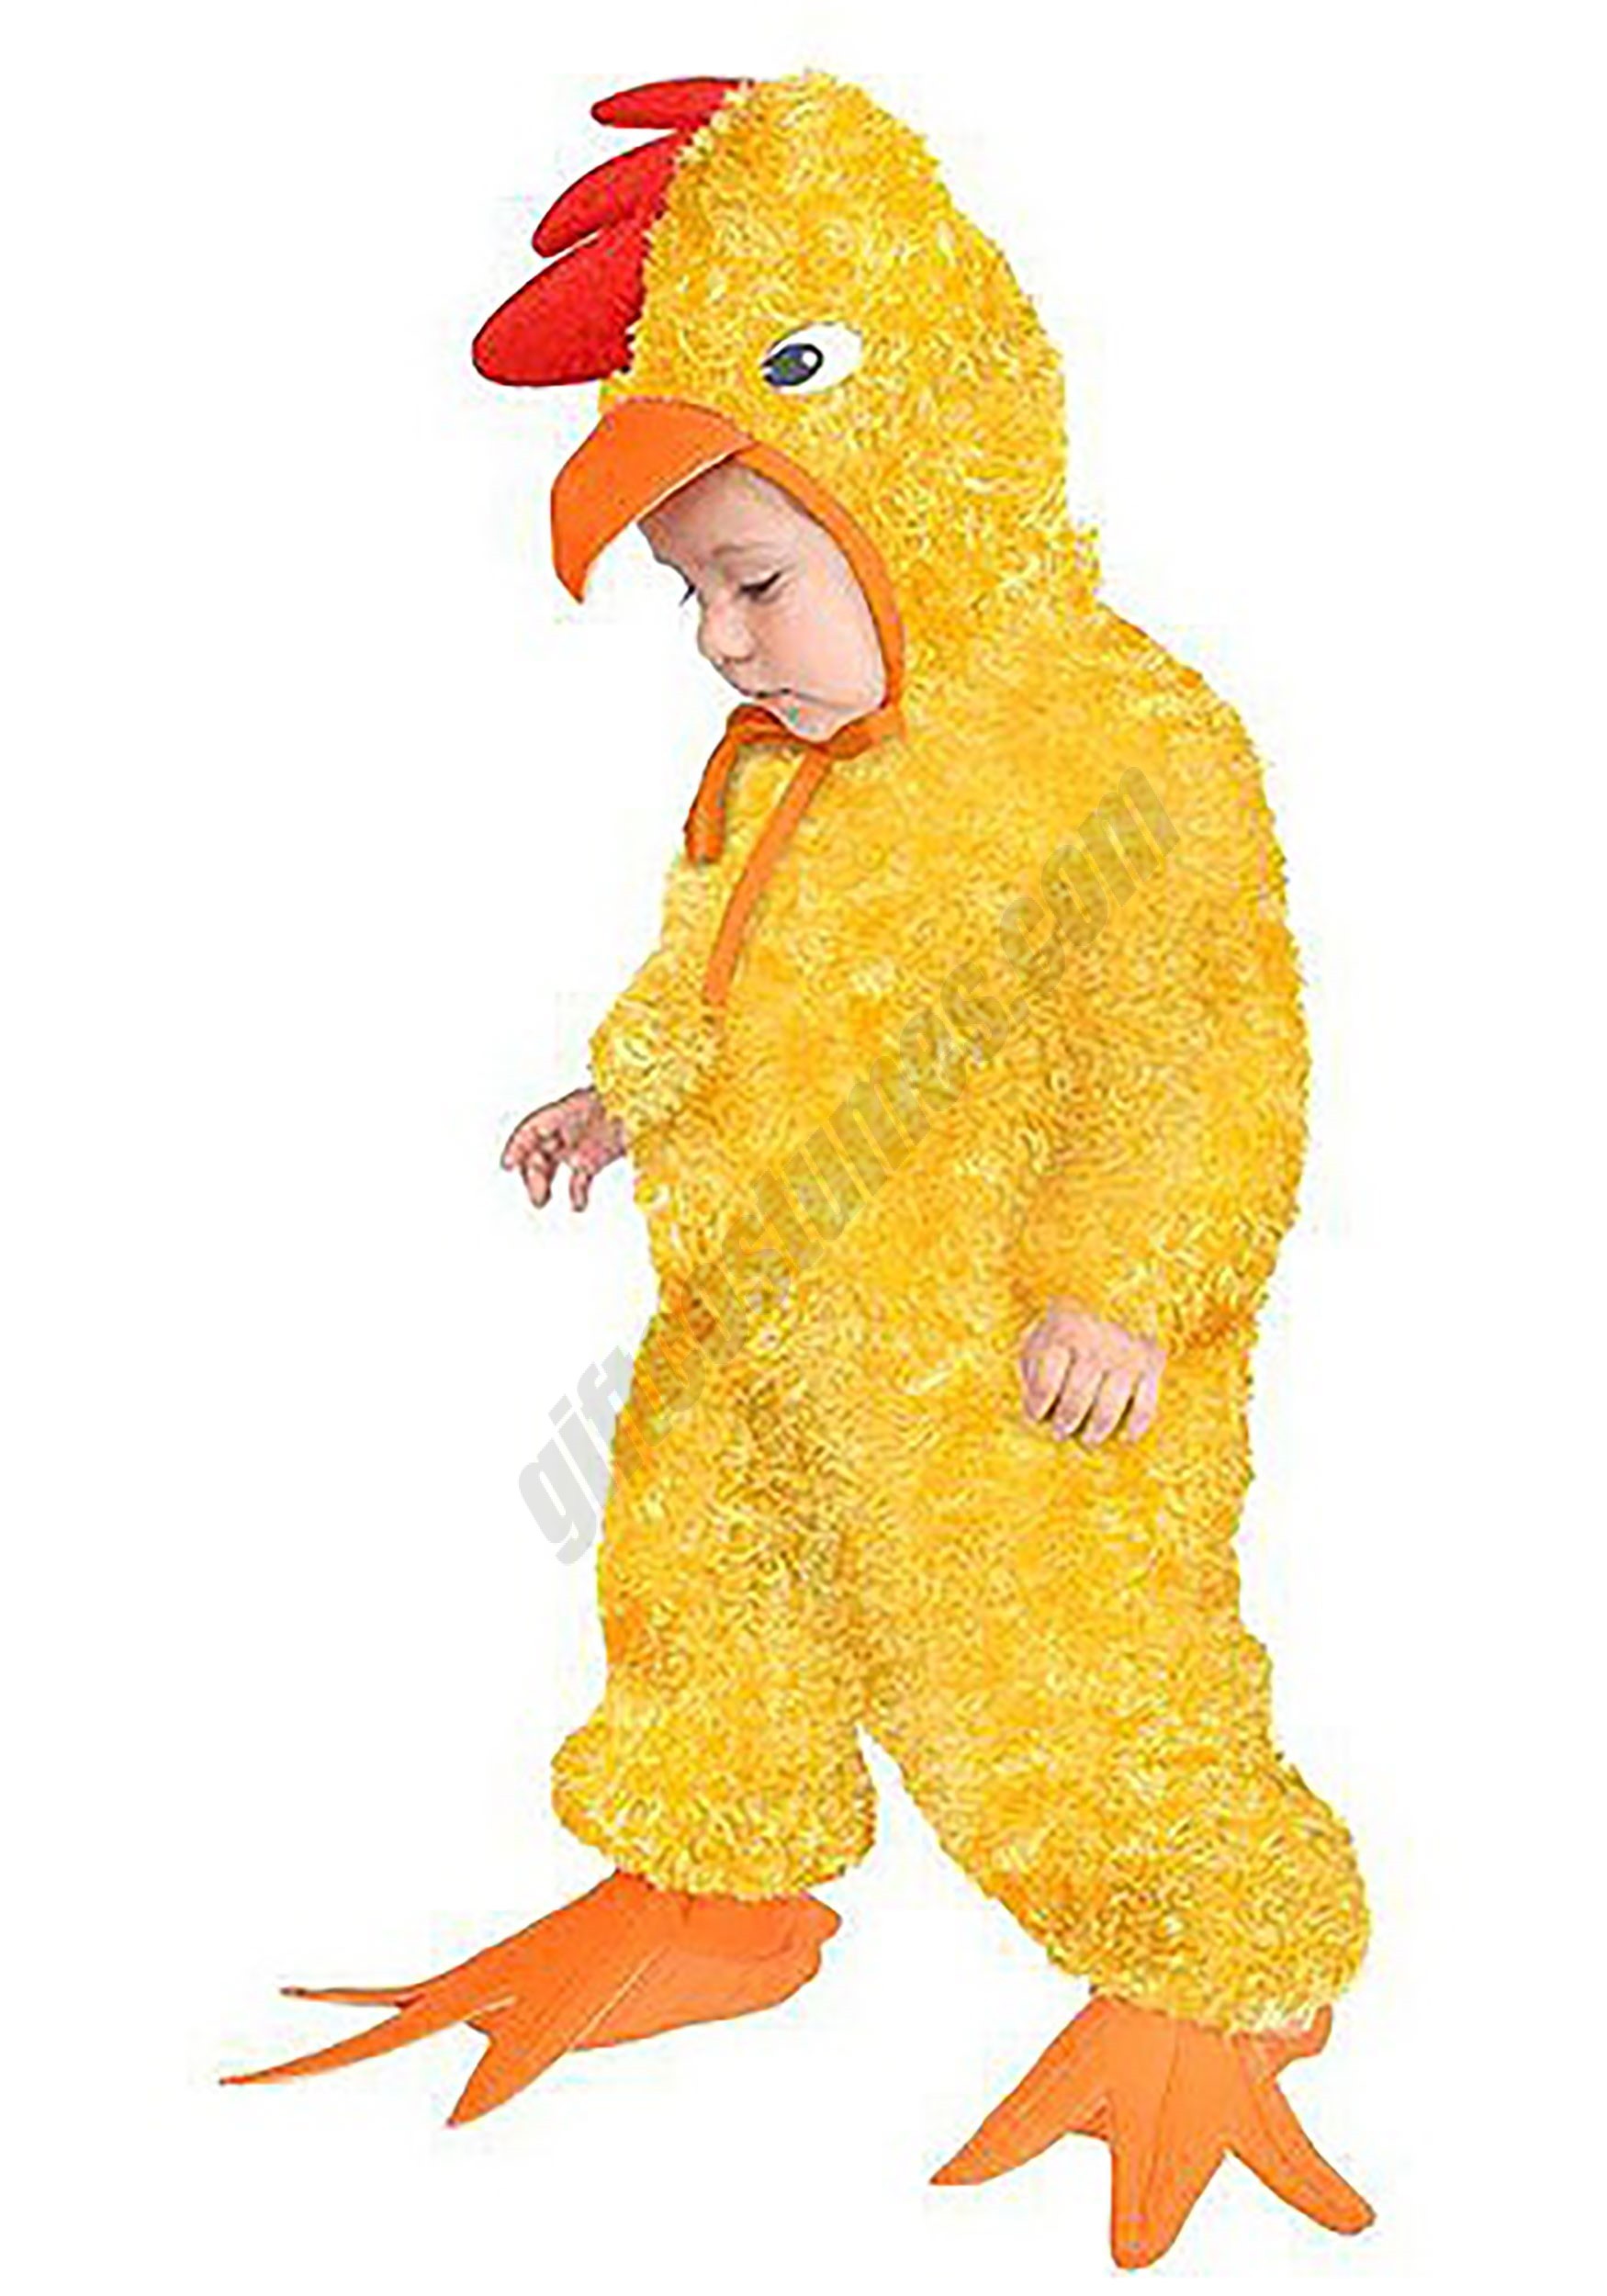 Spring Chicken Costume for Toddlers Promotions - Spring Chicken Costume for Toddlers Promotions